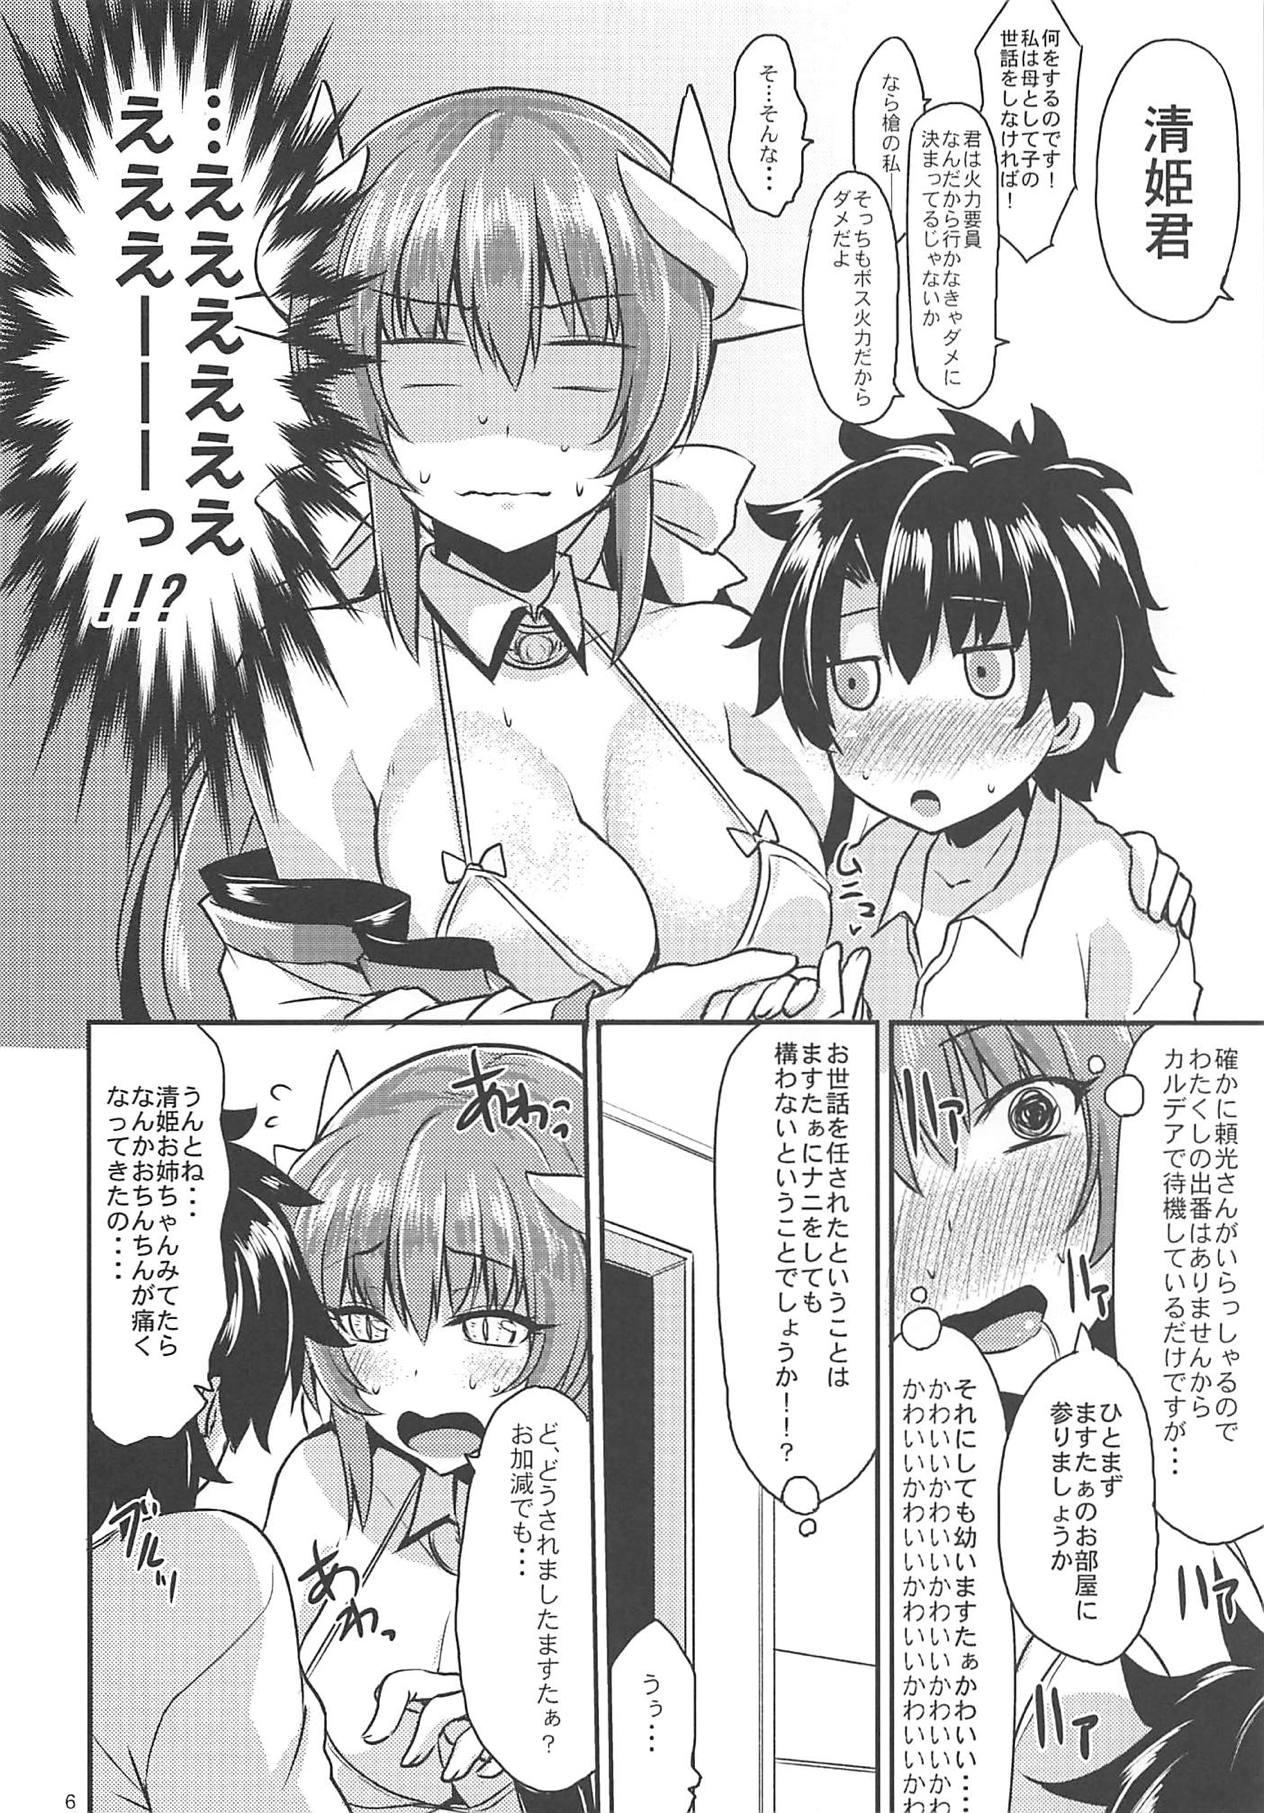 Farting Anehime Hahahime Hebihime - Fate grand order 18yearsold - Page 5